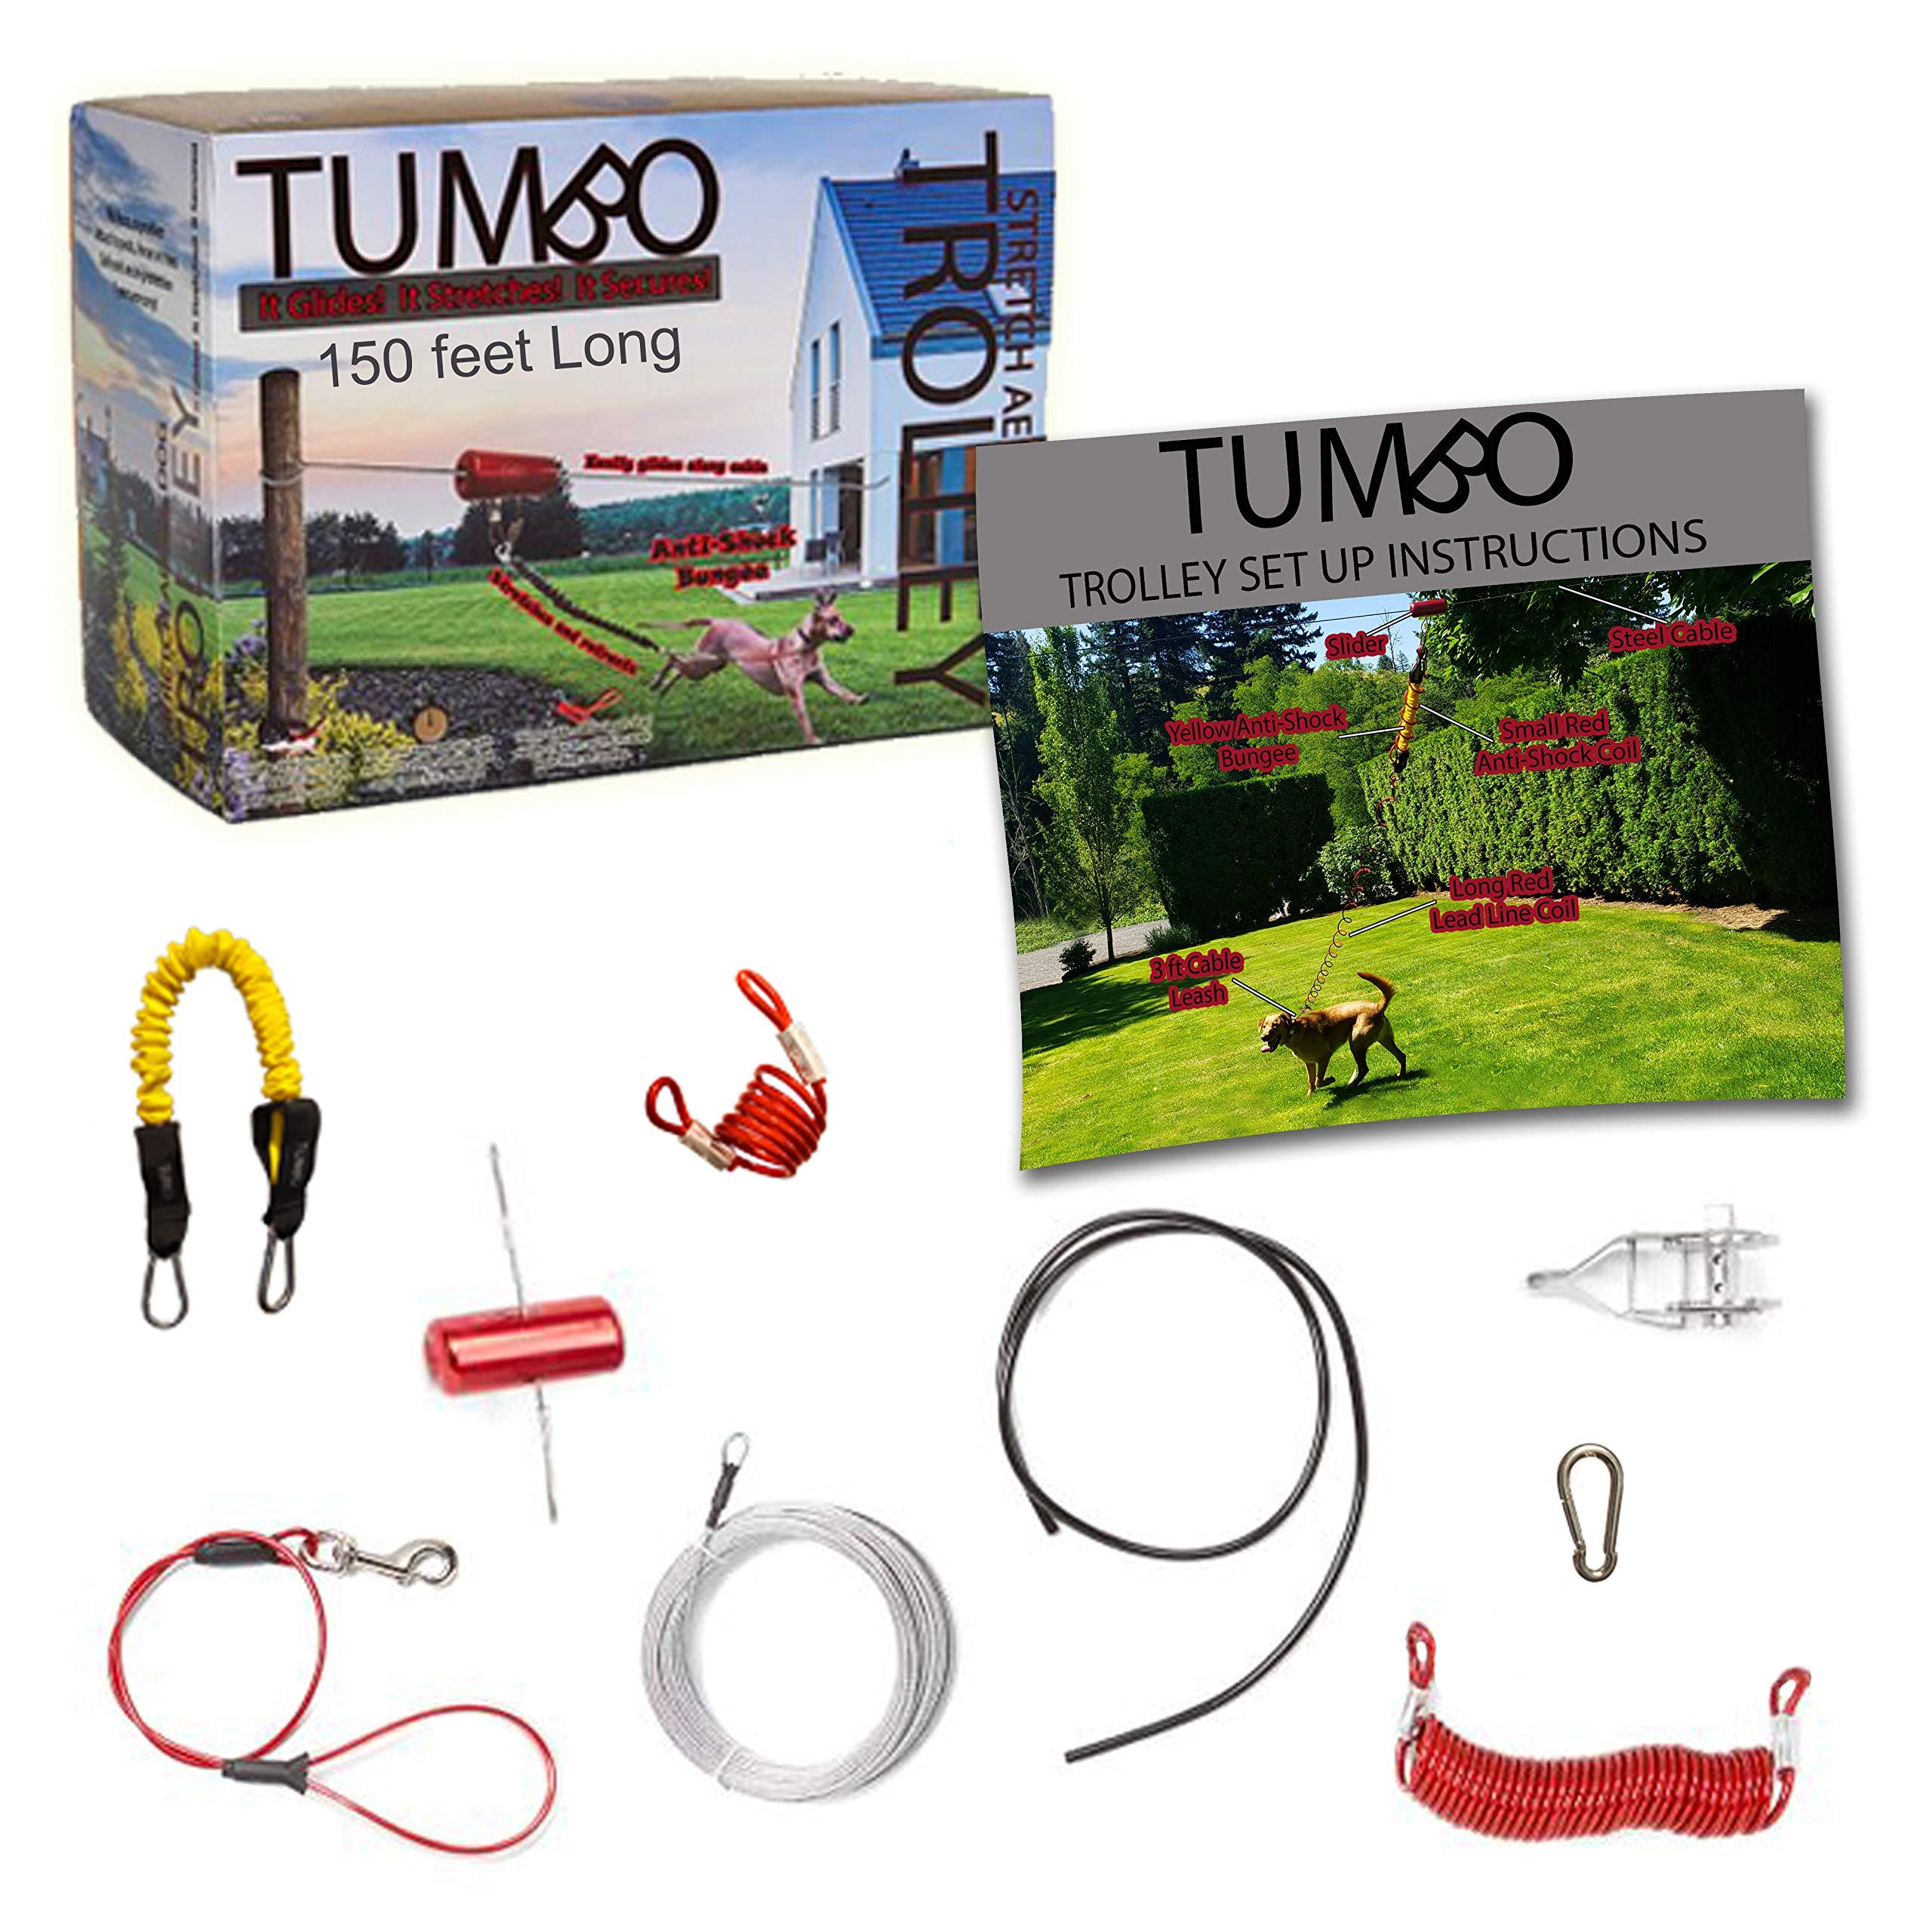 Tumbo Trolley 150 ft Dog Containment System - Solid Slider with Stretching Coil Cable with Anti-Shock Bungee (Safer and Less tangles) Aerial Dog Tie Out